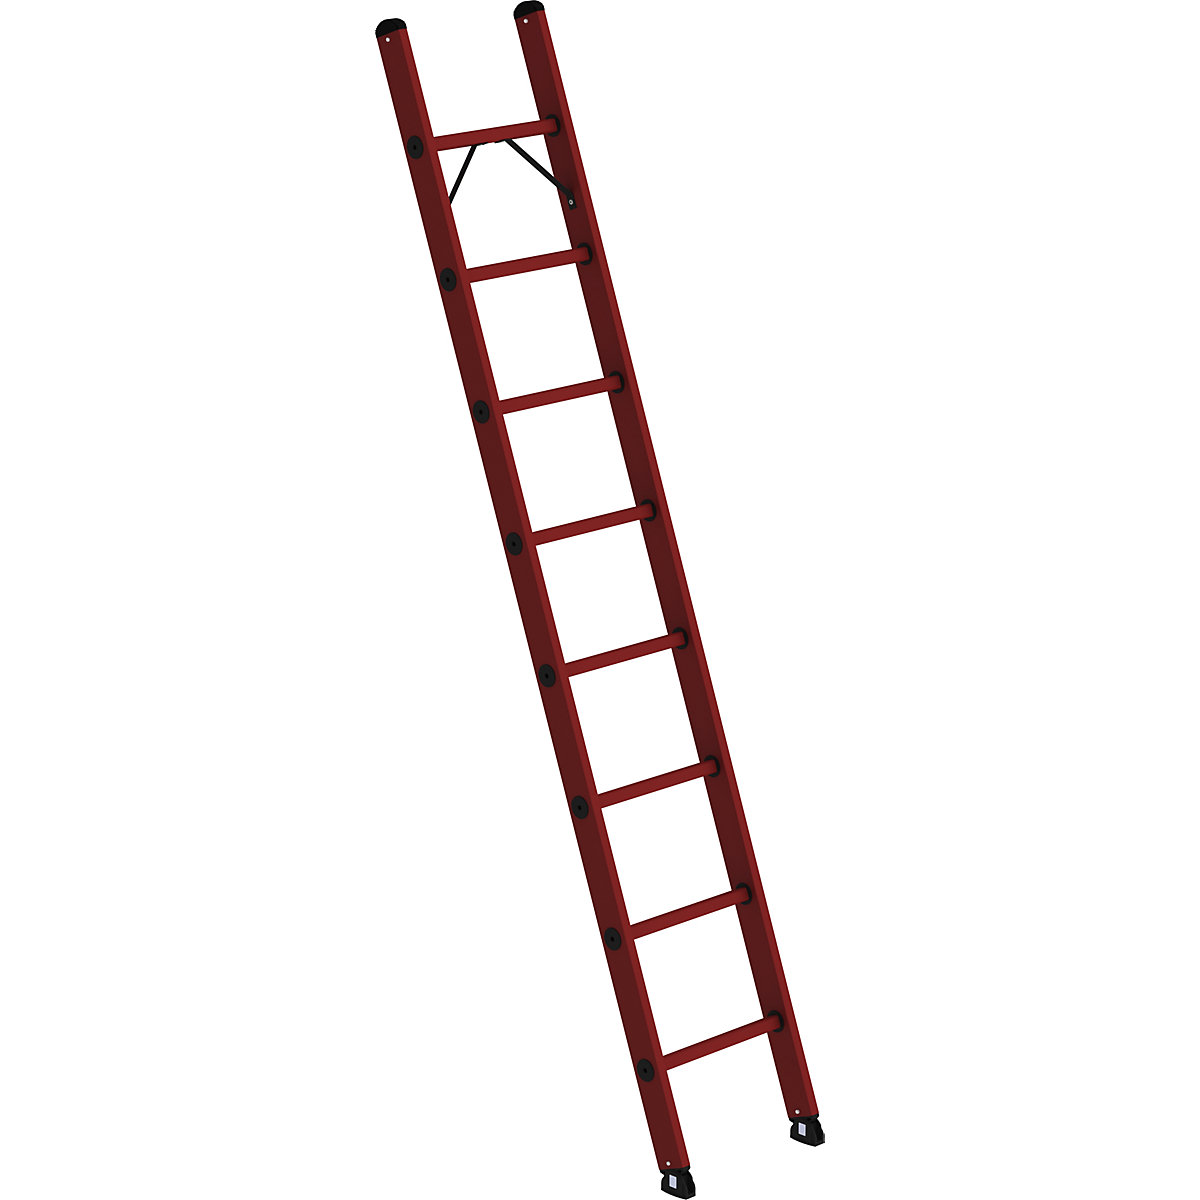 Full plastic lean to ladder – MUNK, made entirely of GRP, 8 rungs-1